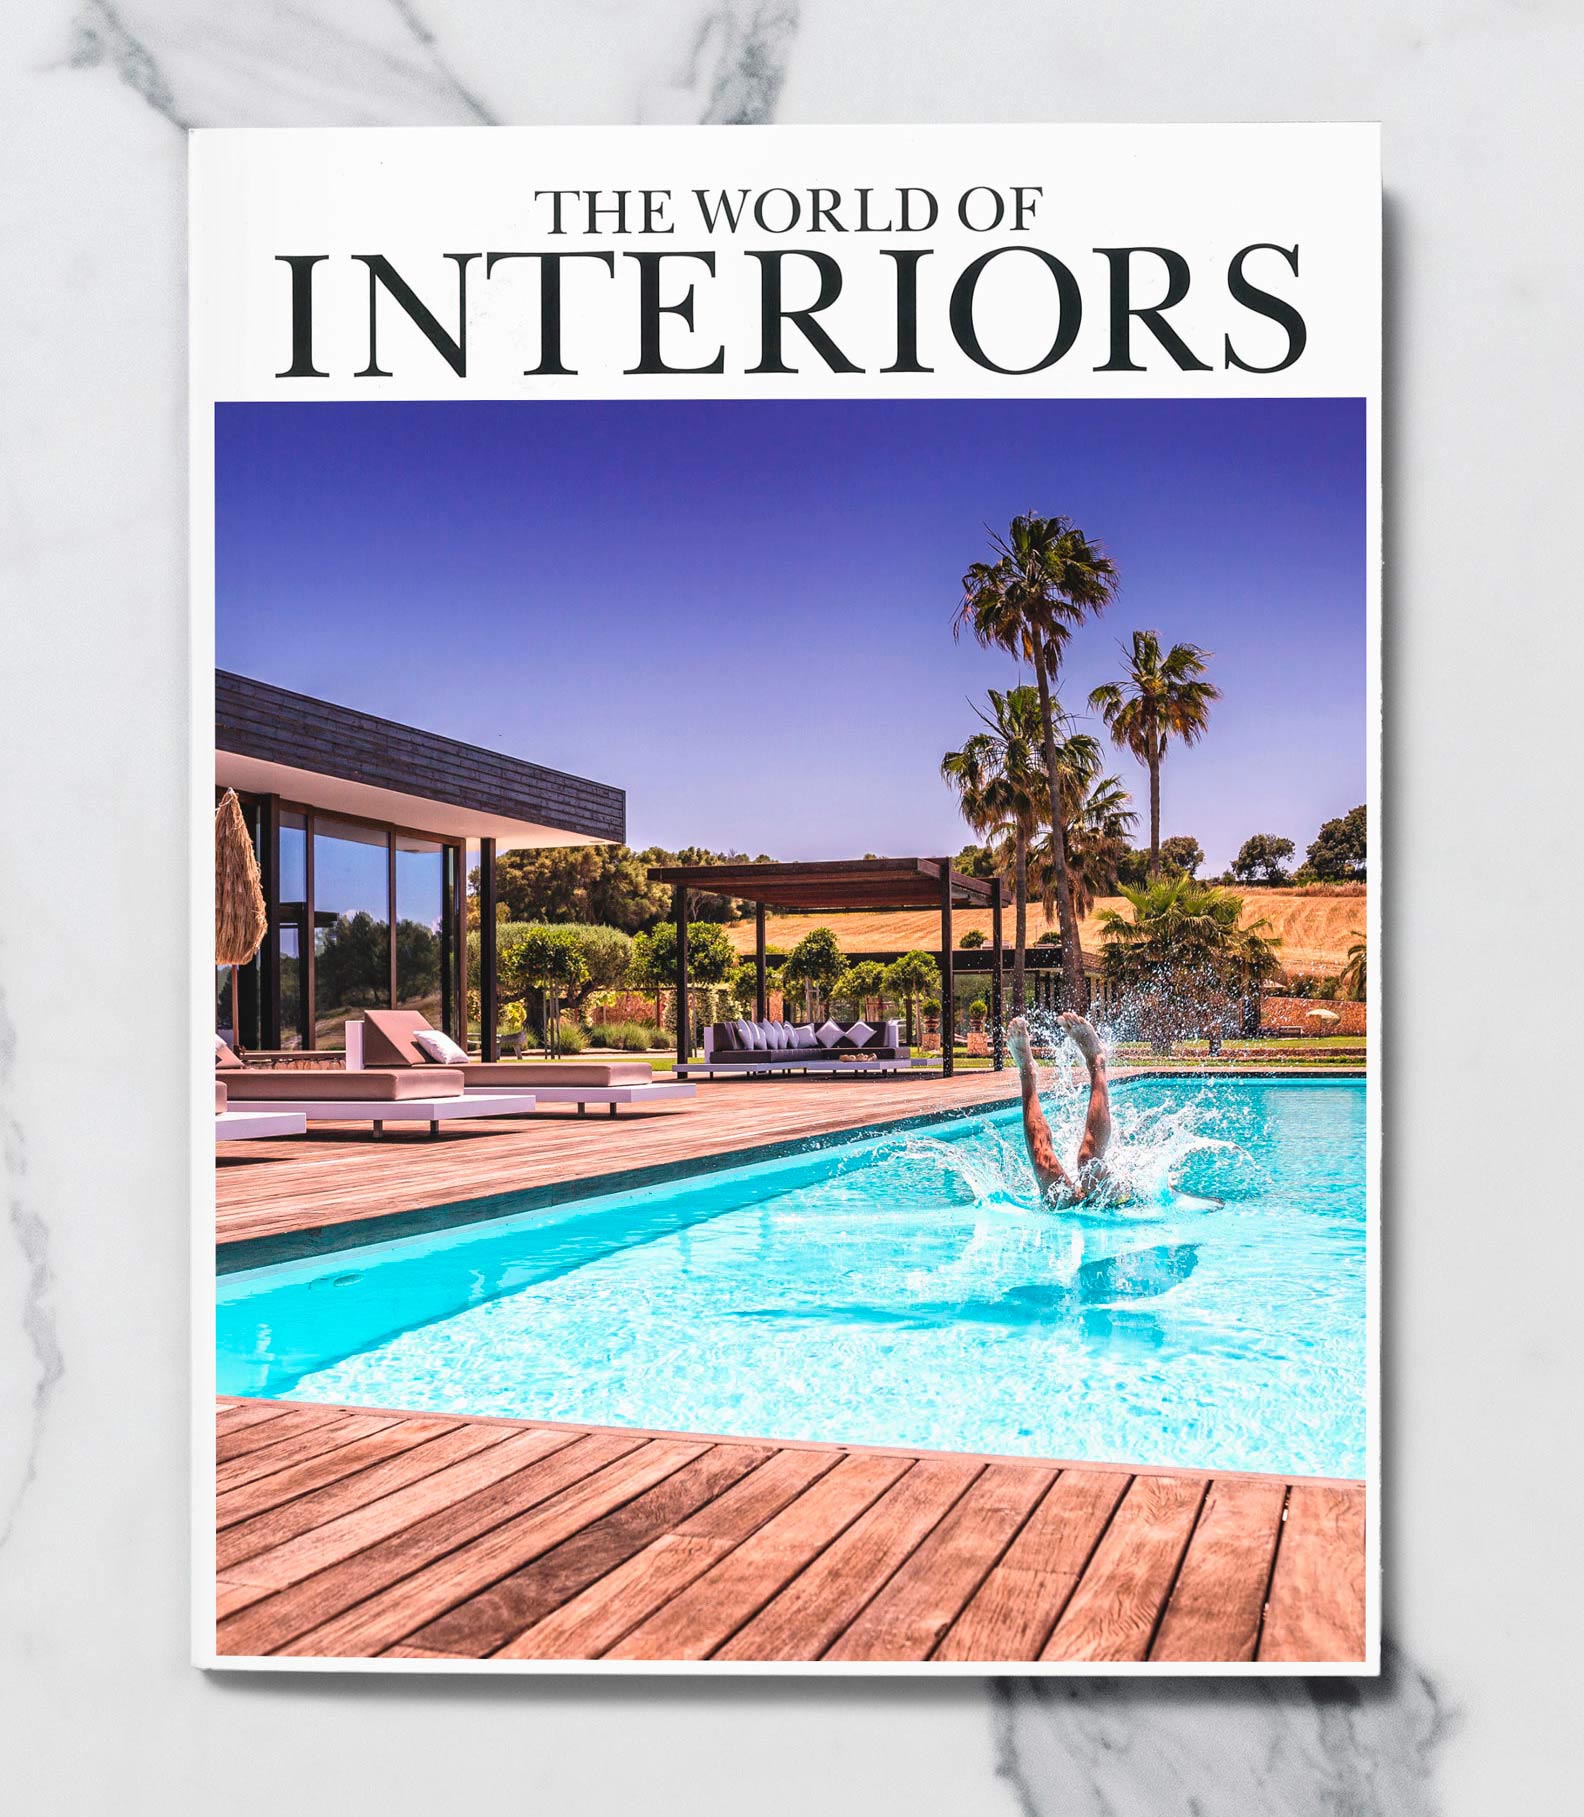 A magazine cover featuring an image captured by Wright Content. The photo depicts a person diving into a pool on the terrace of a modernist home, surrounded by palm trees and rolling hills. The glass-box design of the home creates a striking backdrop.